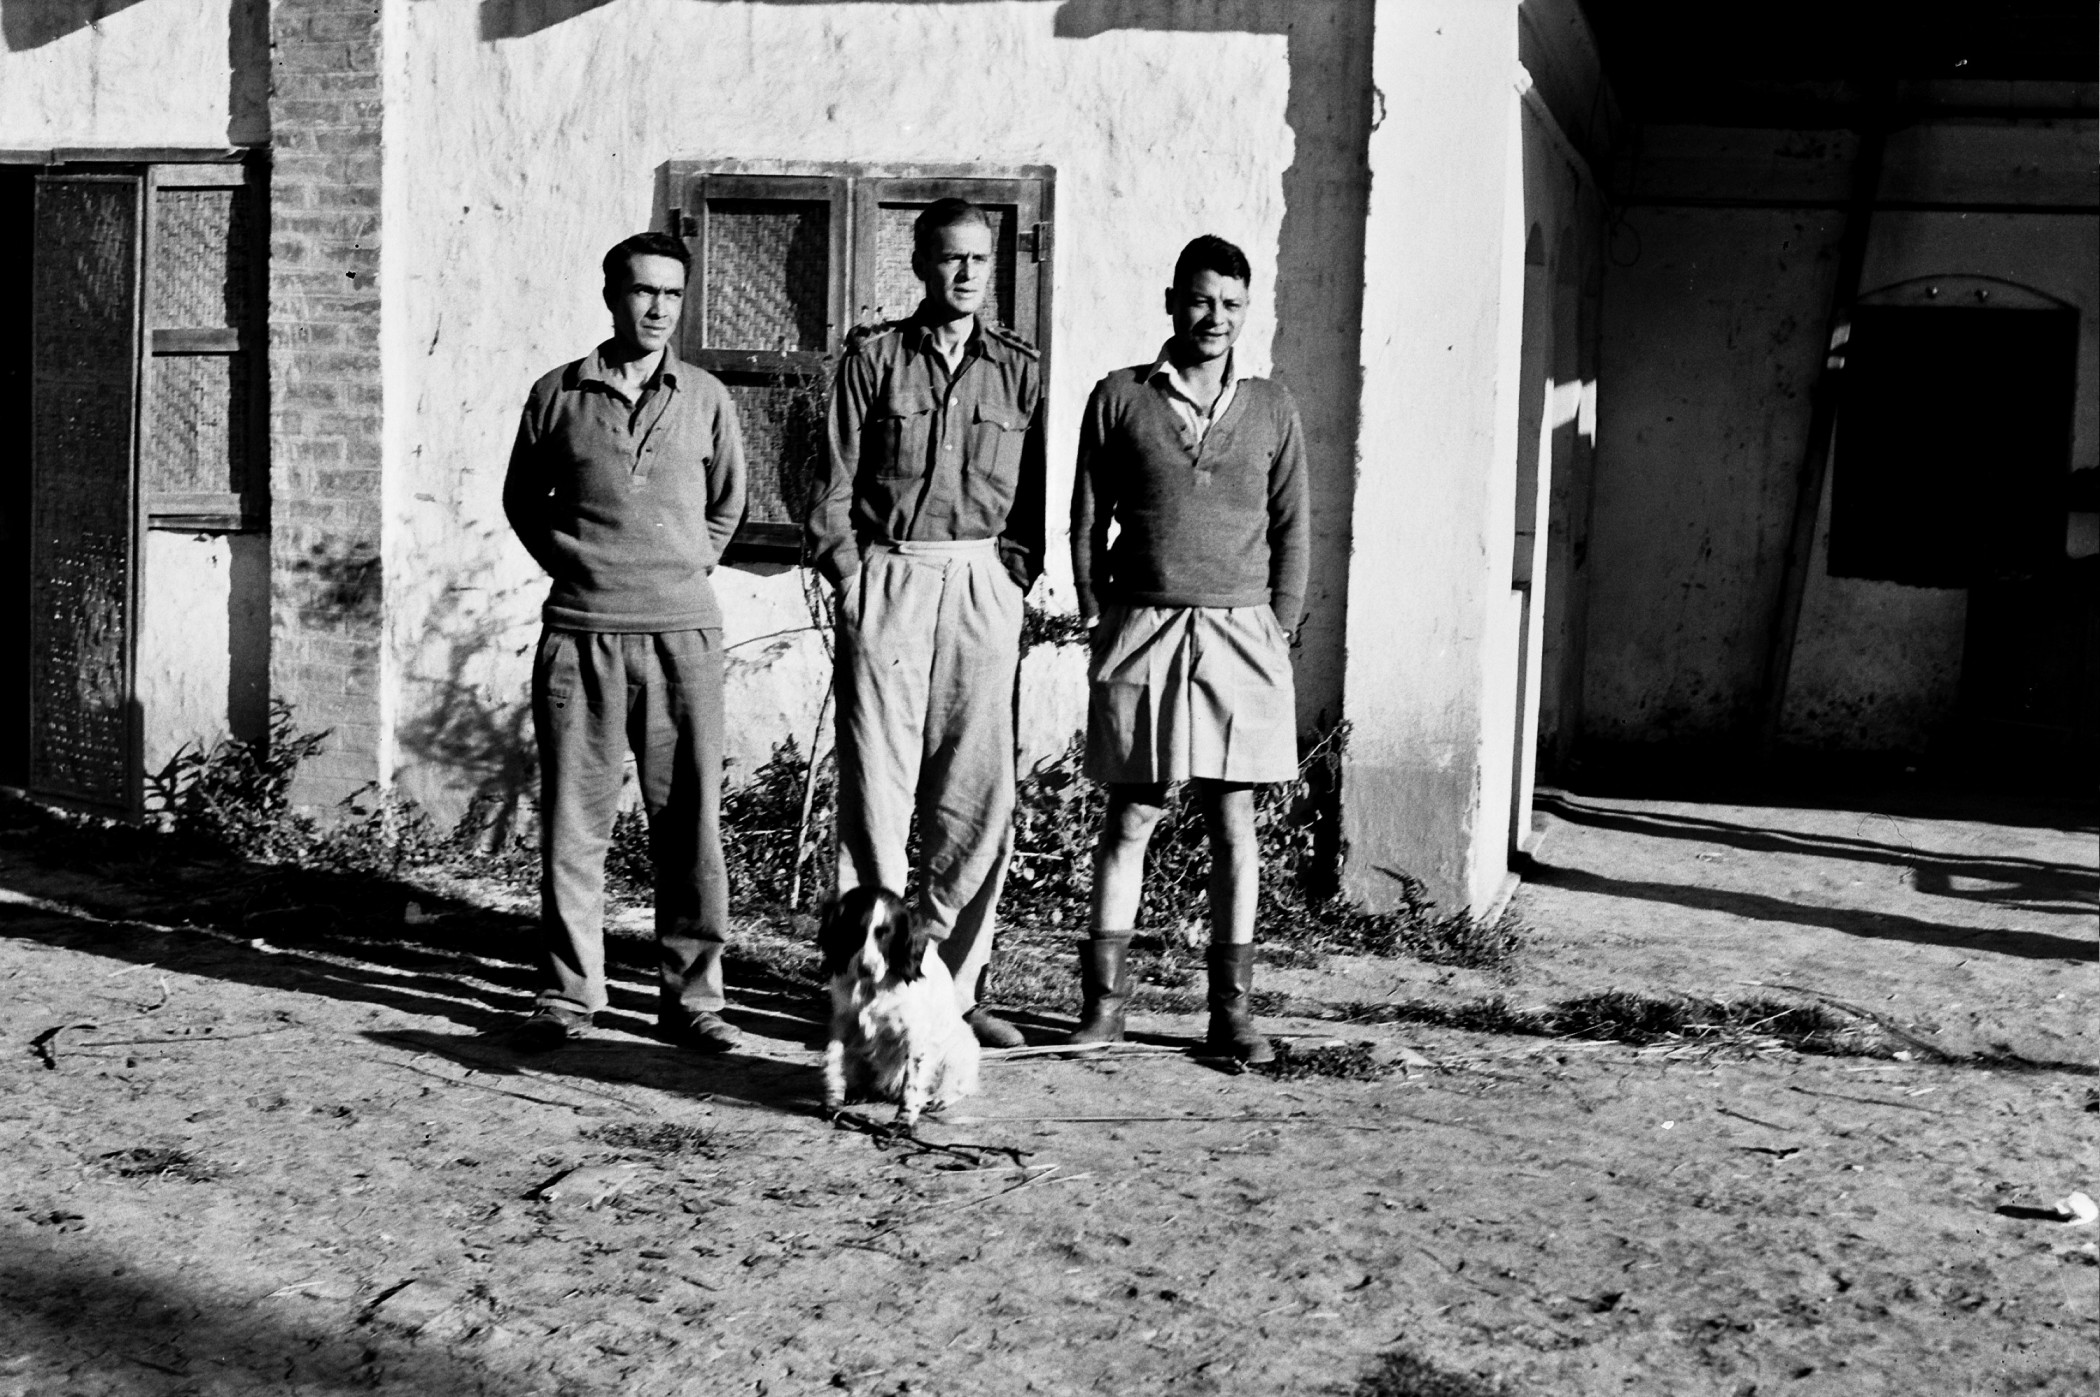 greyscale photo\' showing three men standing in a row in front of a white cottage-ish building, with a black and white spaniel sitting in front of them: on the left a swarthy man with his hands behind his back,wearing an army-style pullover and slacks; in the middle a tall white man with his hands in his pockets, wearing a military shirt and slacks; on the right a more Asian-looking man with his hands in his pockets, wearing a military shirt and shorts and Wellington boots